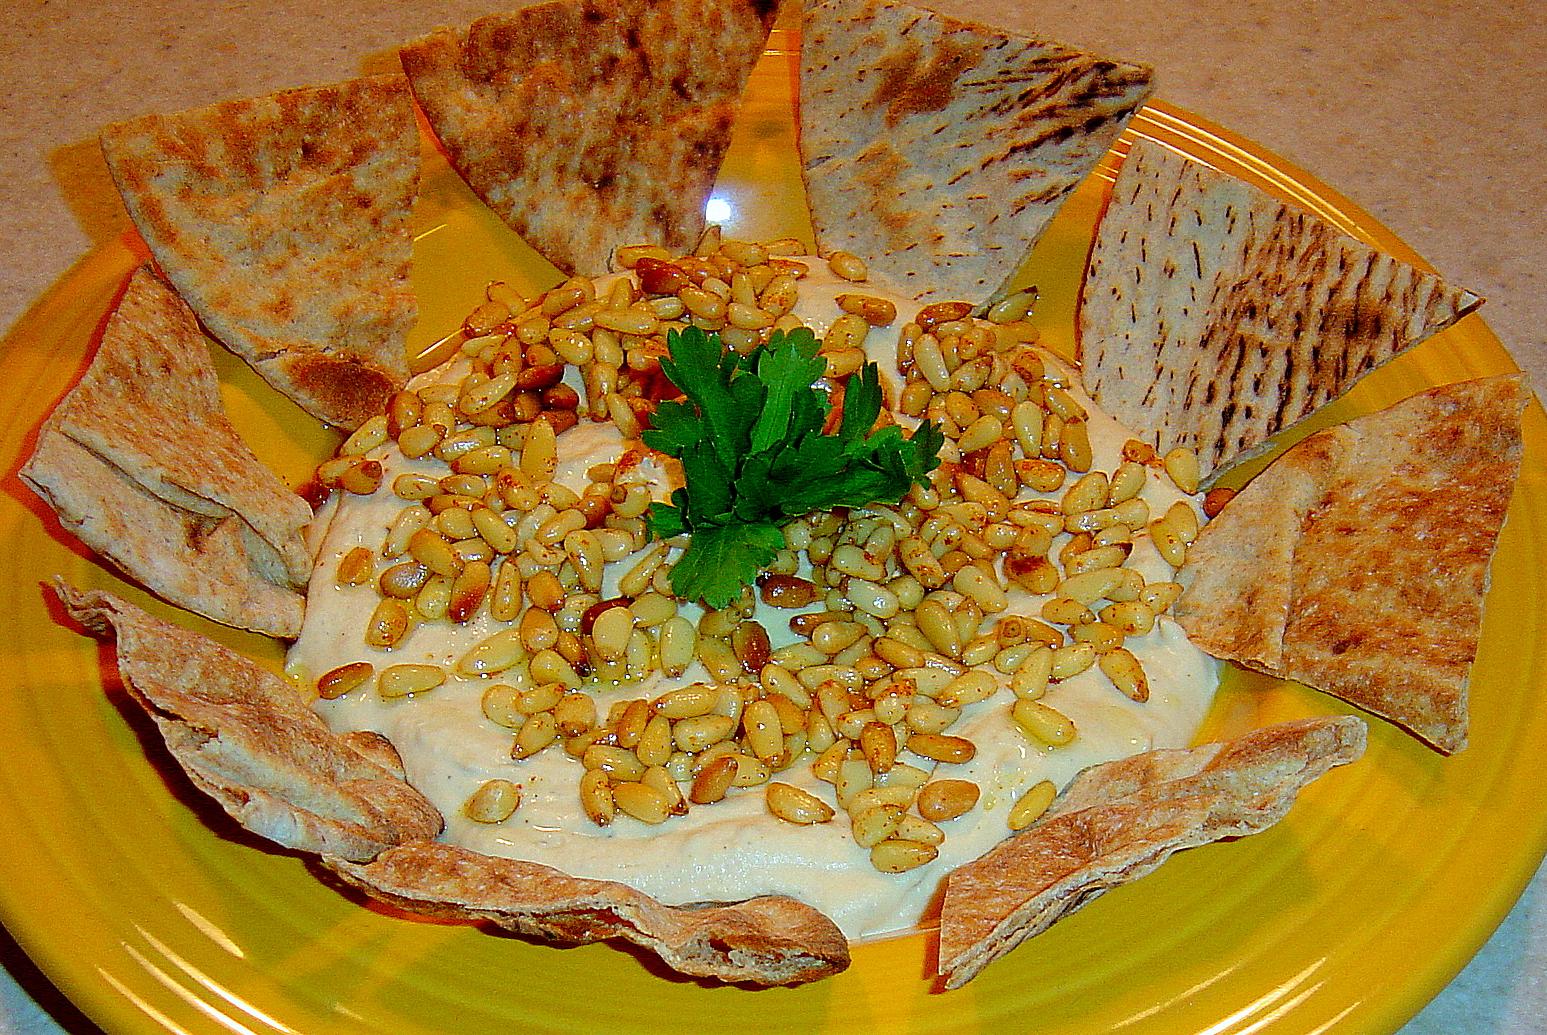  Make your hummus pop with a garnish of fragrant pine nuts.